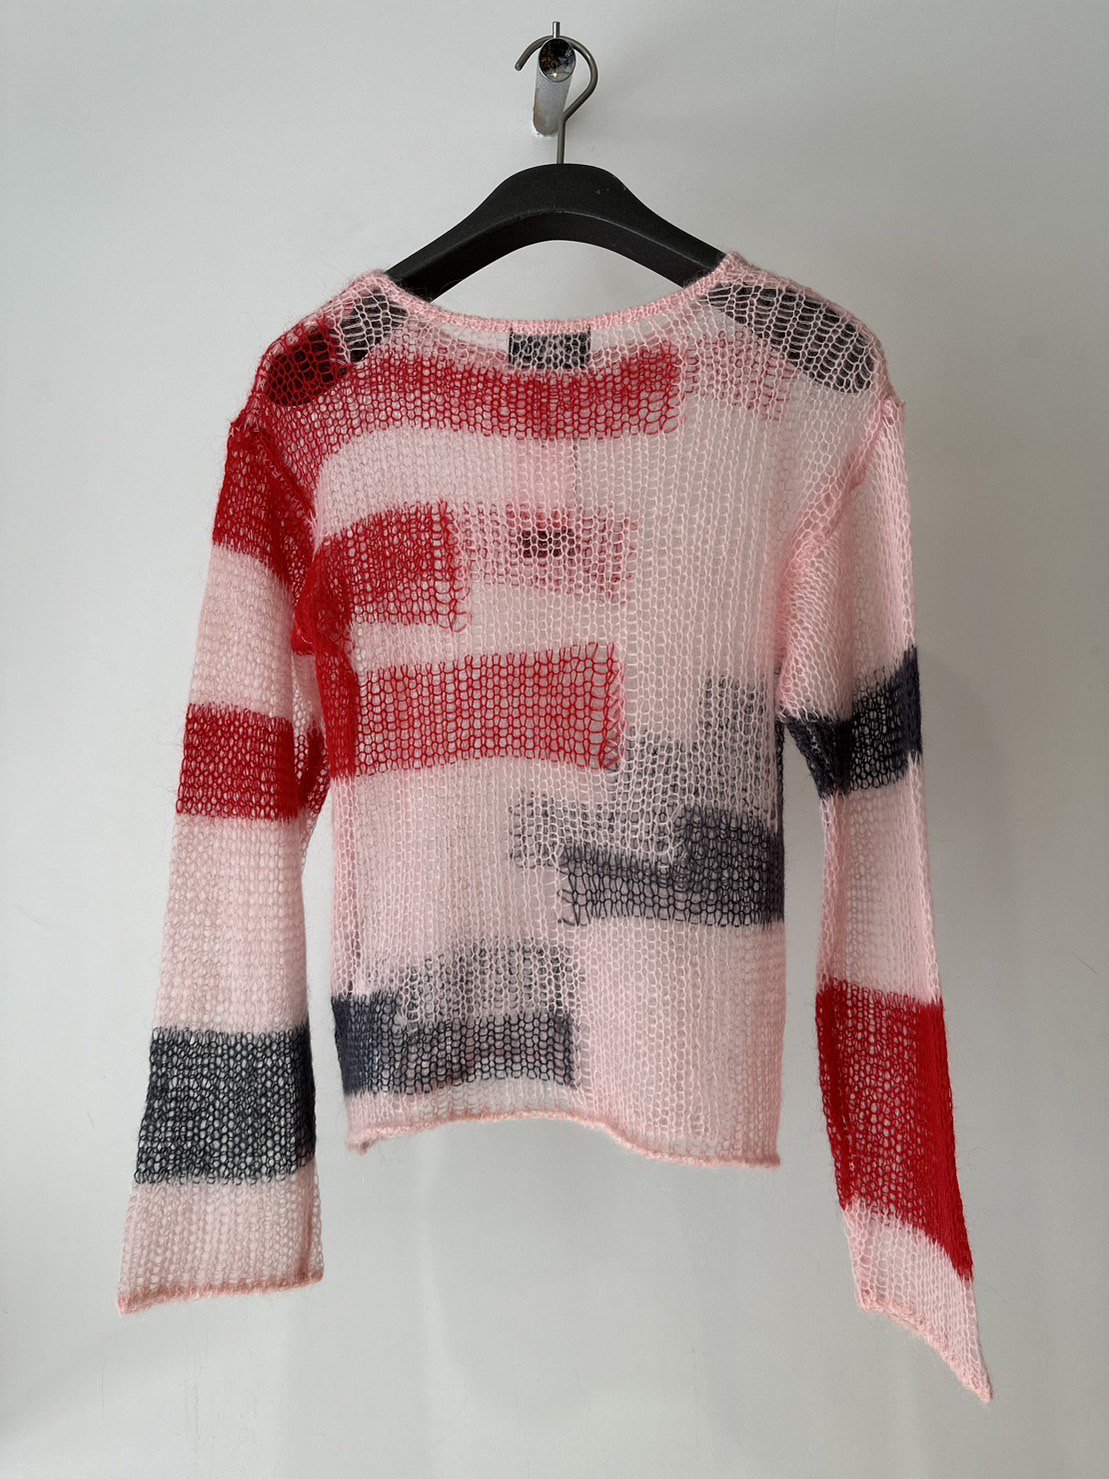 soduk<br />patchwork knit tops / pink<img class='new_mark_img2' src='https://img.shop-pro.jp/img/new/icons14.gif' style='border:none;display:inline;margin:0px;padding:0px;width:auto;' />